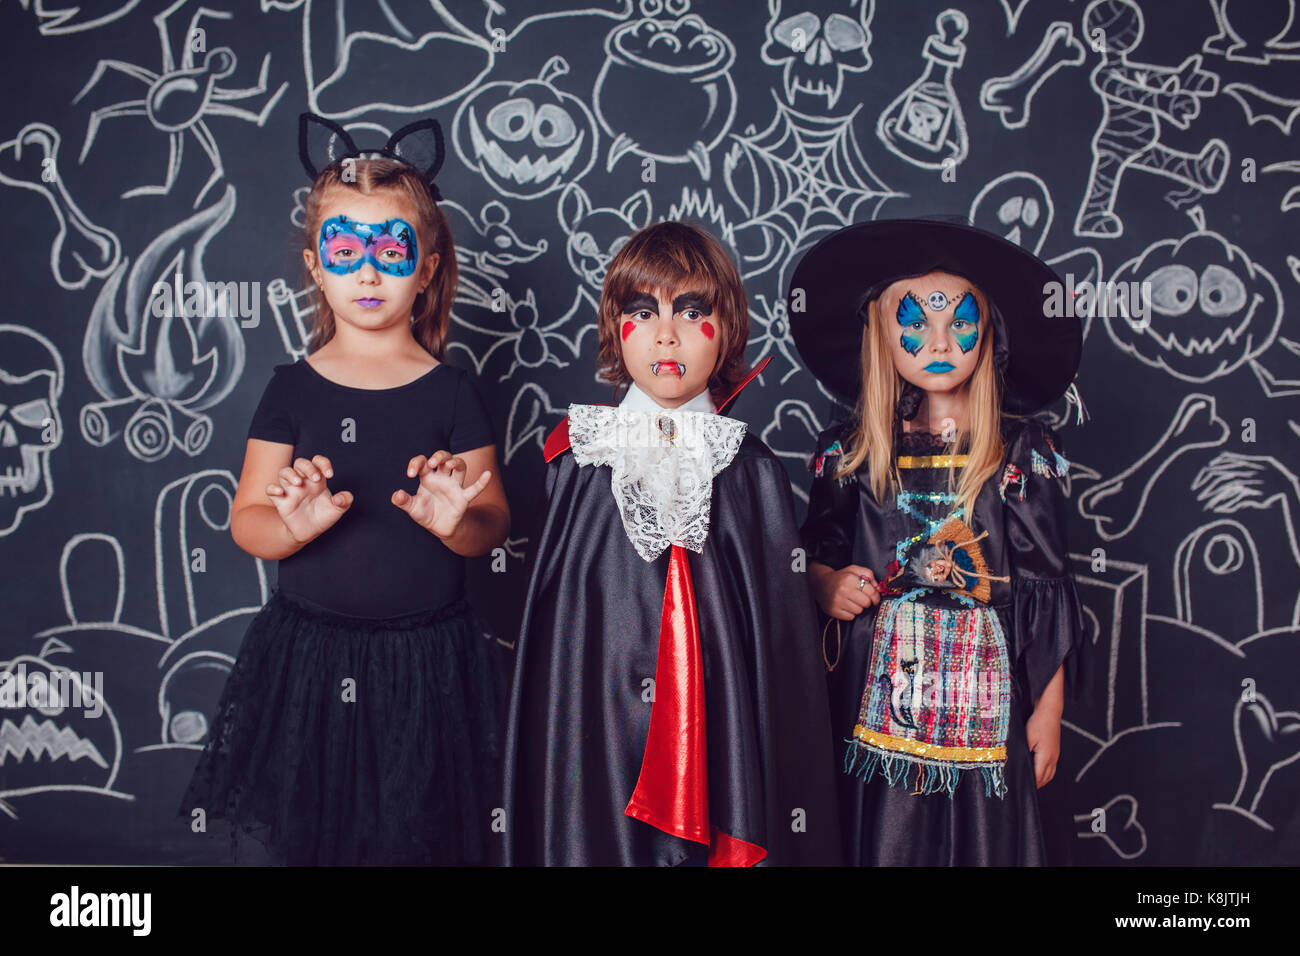 Children in scary Halloween costumes stand against a wall with drawings. Stock Photo